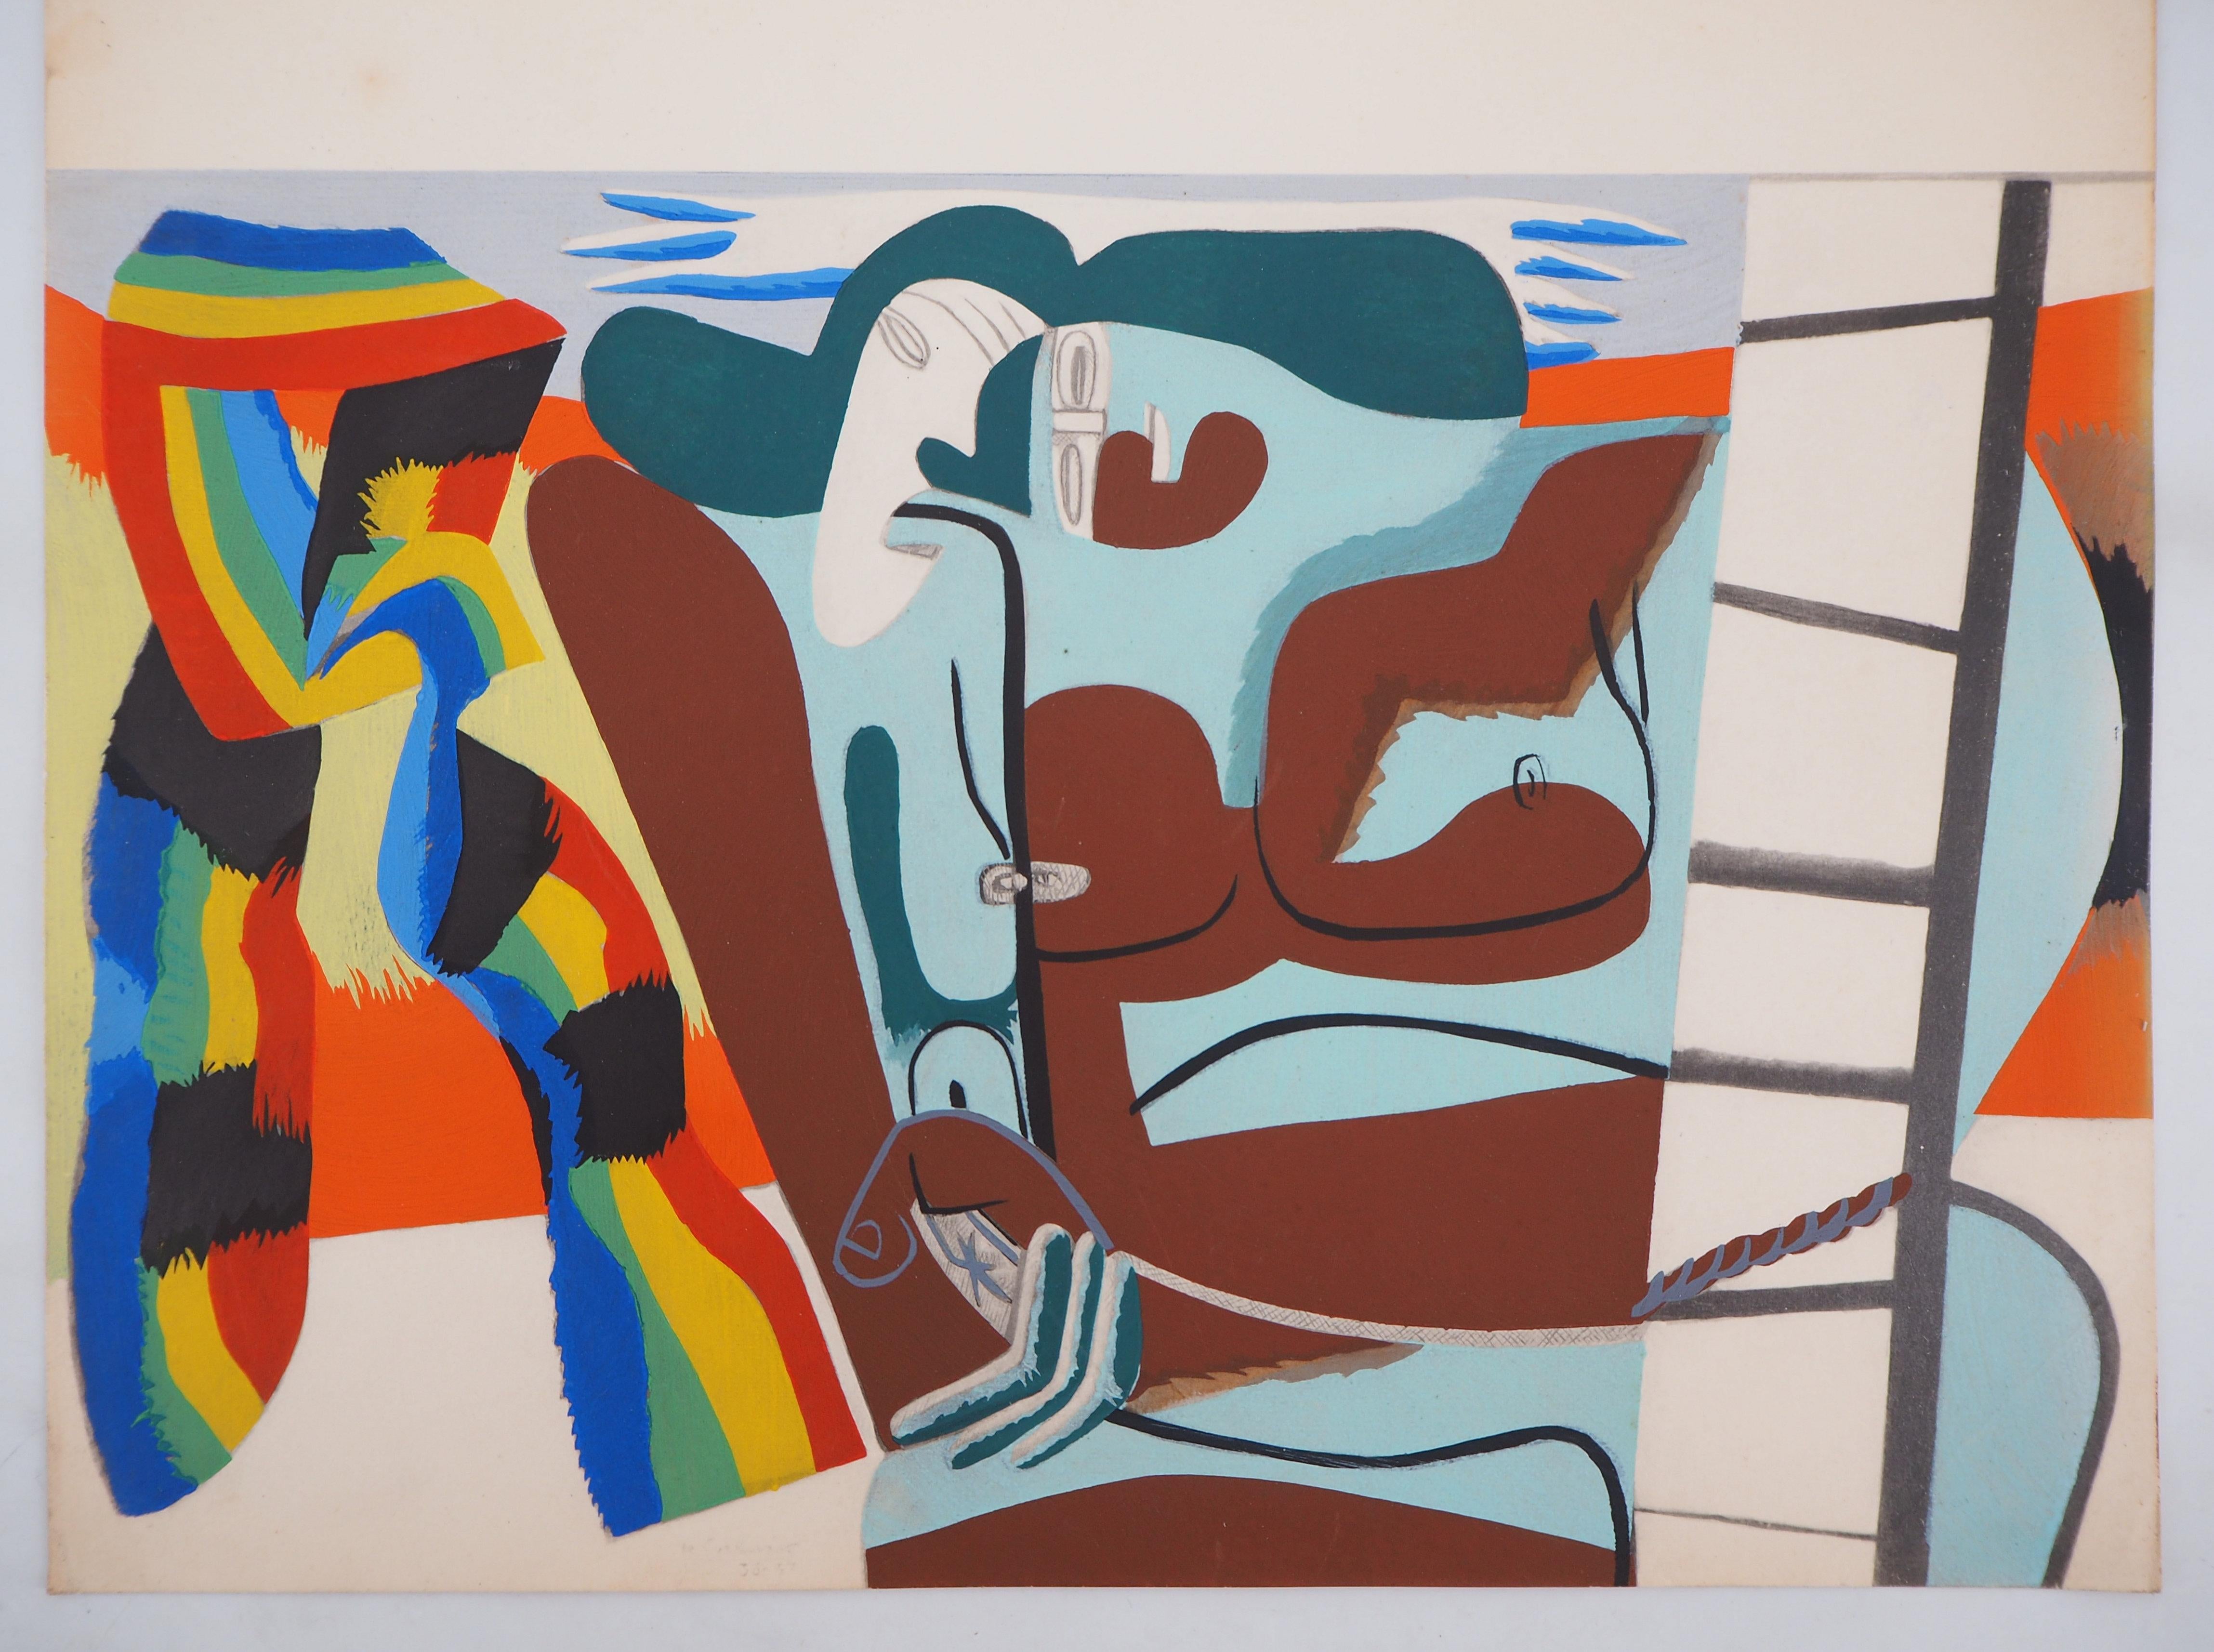 Le Corbusier Figurative Print - Two Women with Rainbow Scarf - Lithograph and watercolor stencil